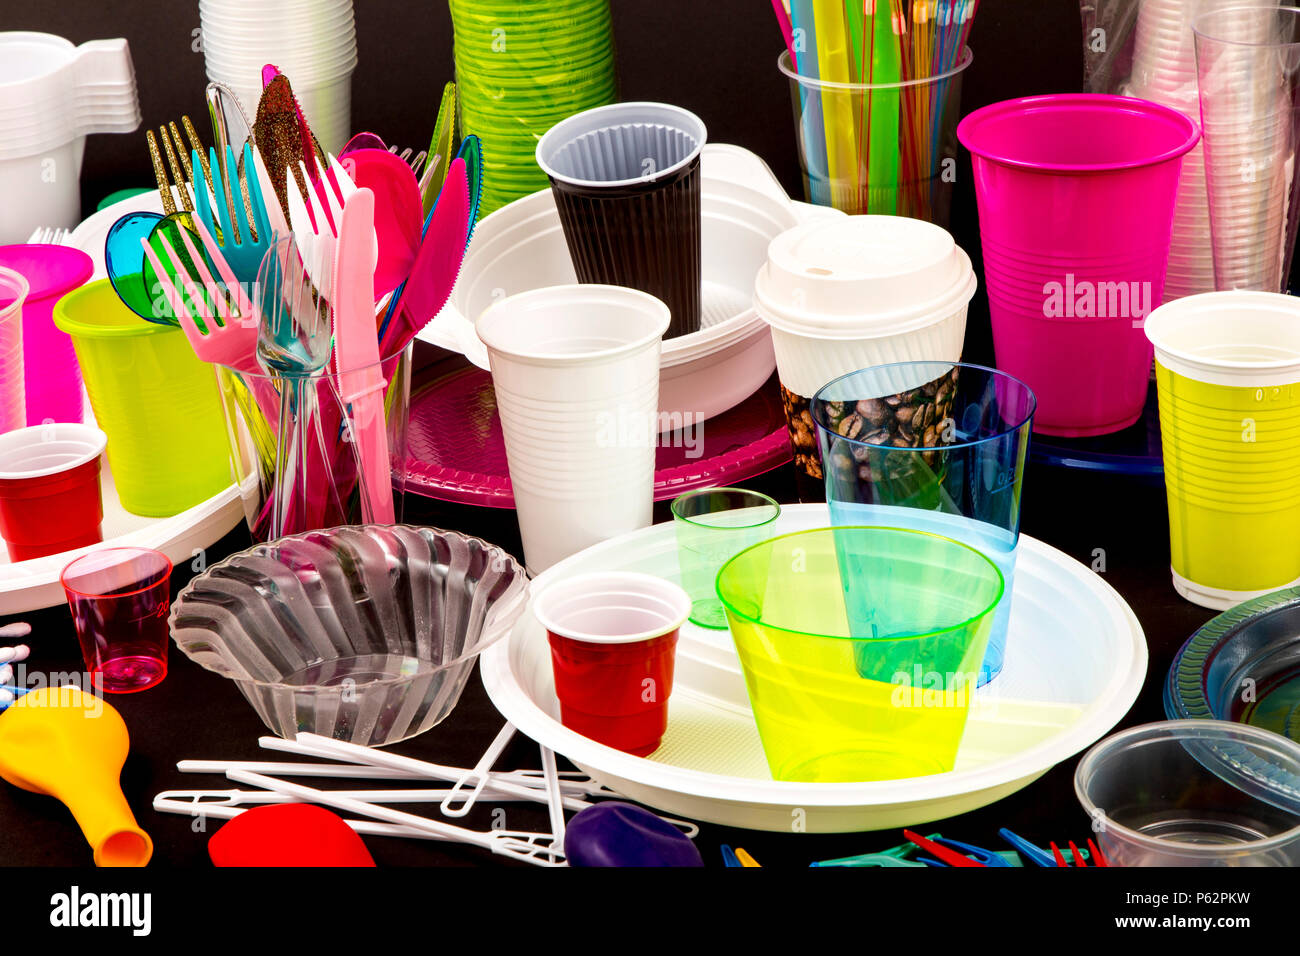 https://c8.alamy.com/comp/P62PKW/disposable-tableware-plastic-utensils-plastic-cups-cutlery-and-other-plastic-products-plastic-waste-various-colors-sizes-and-types-P62PKW.jpg